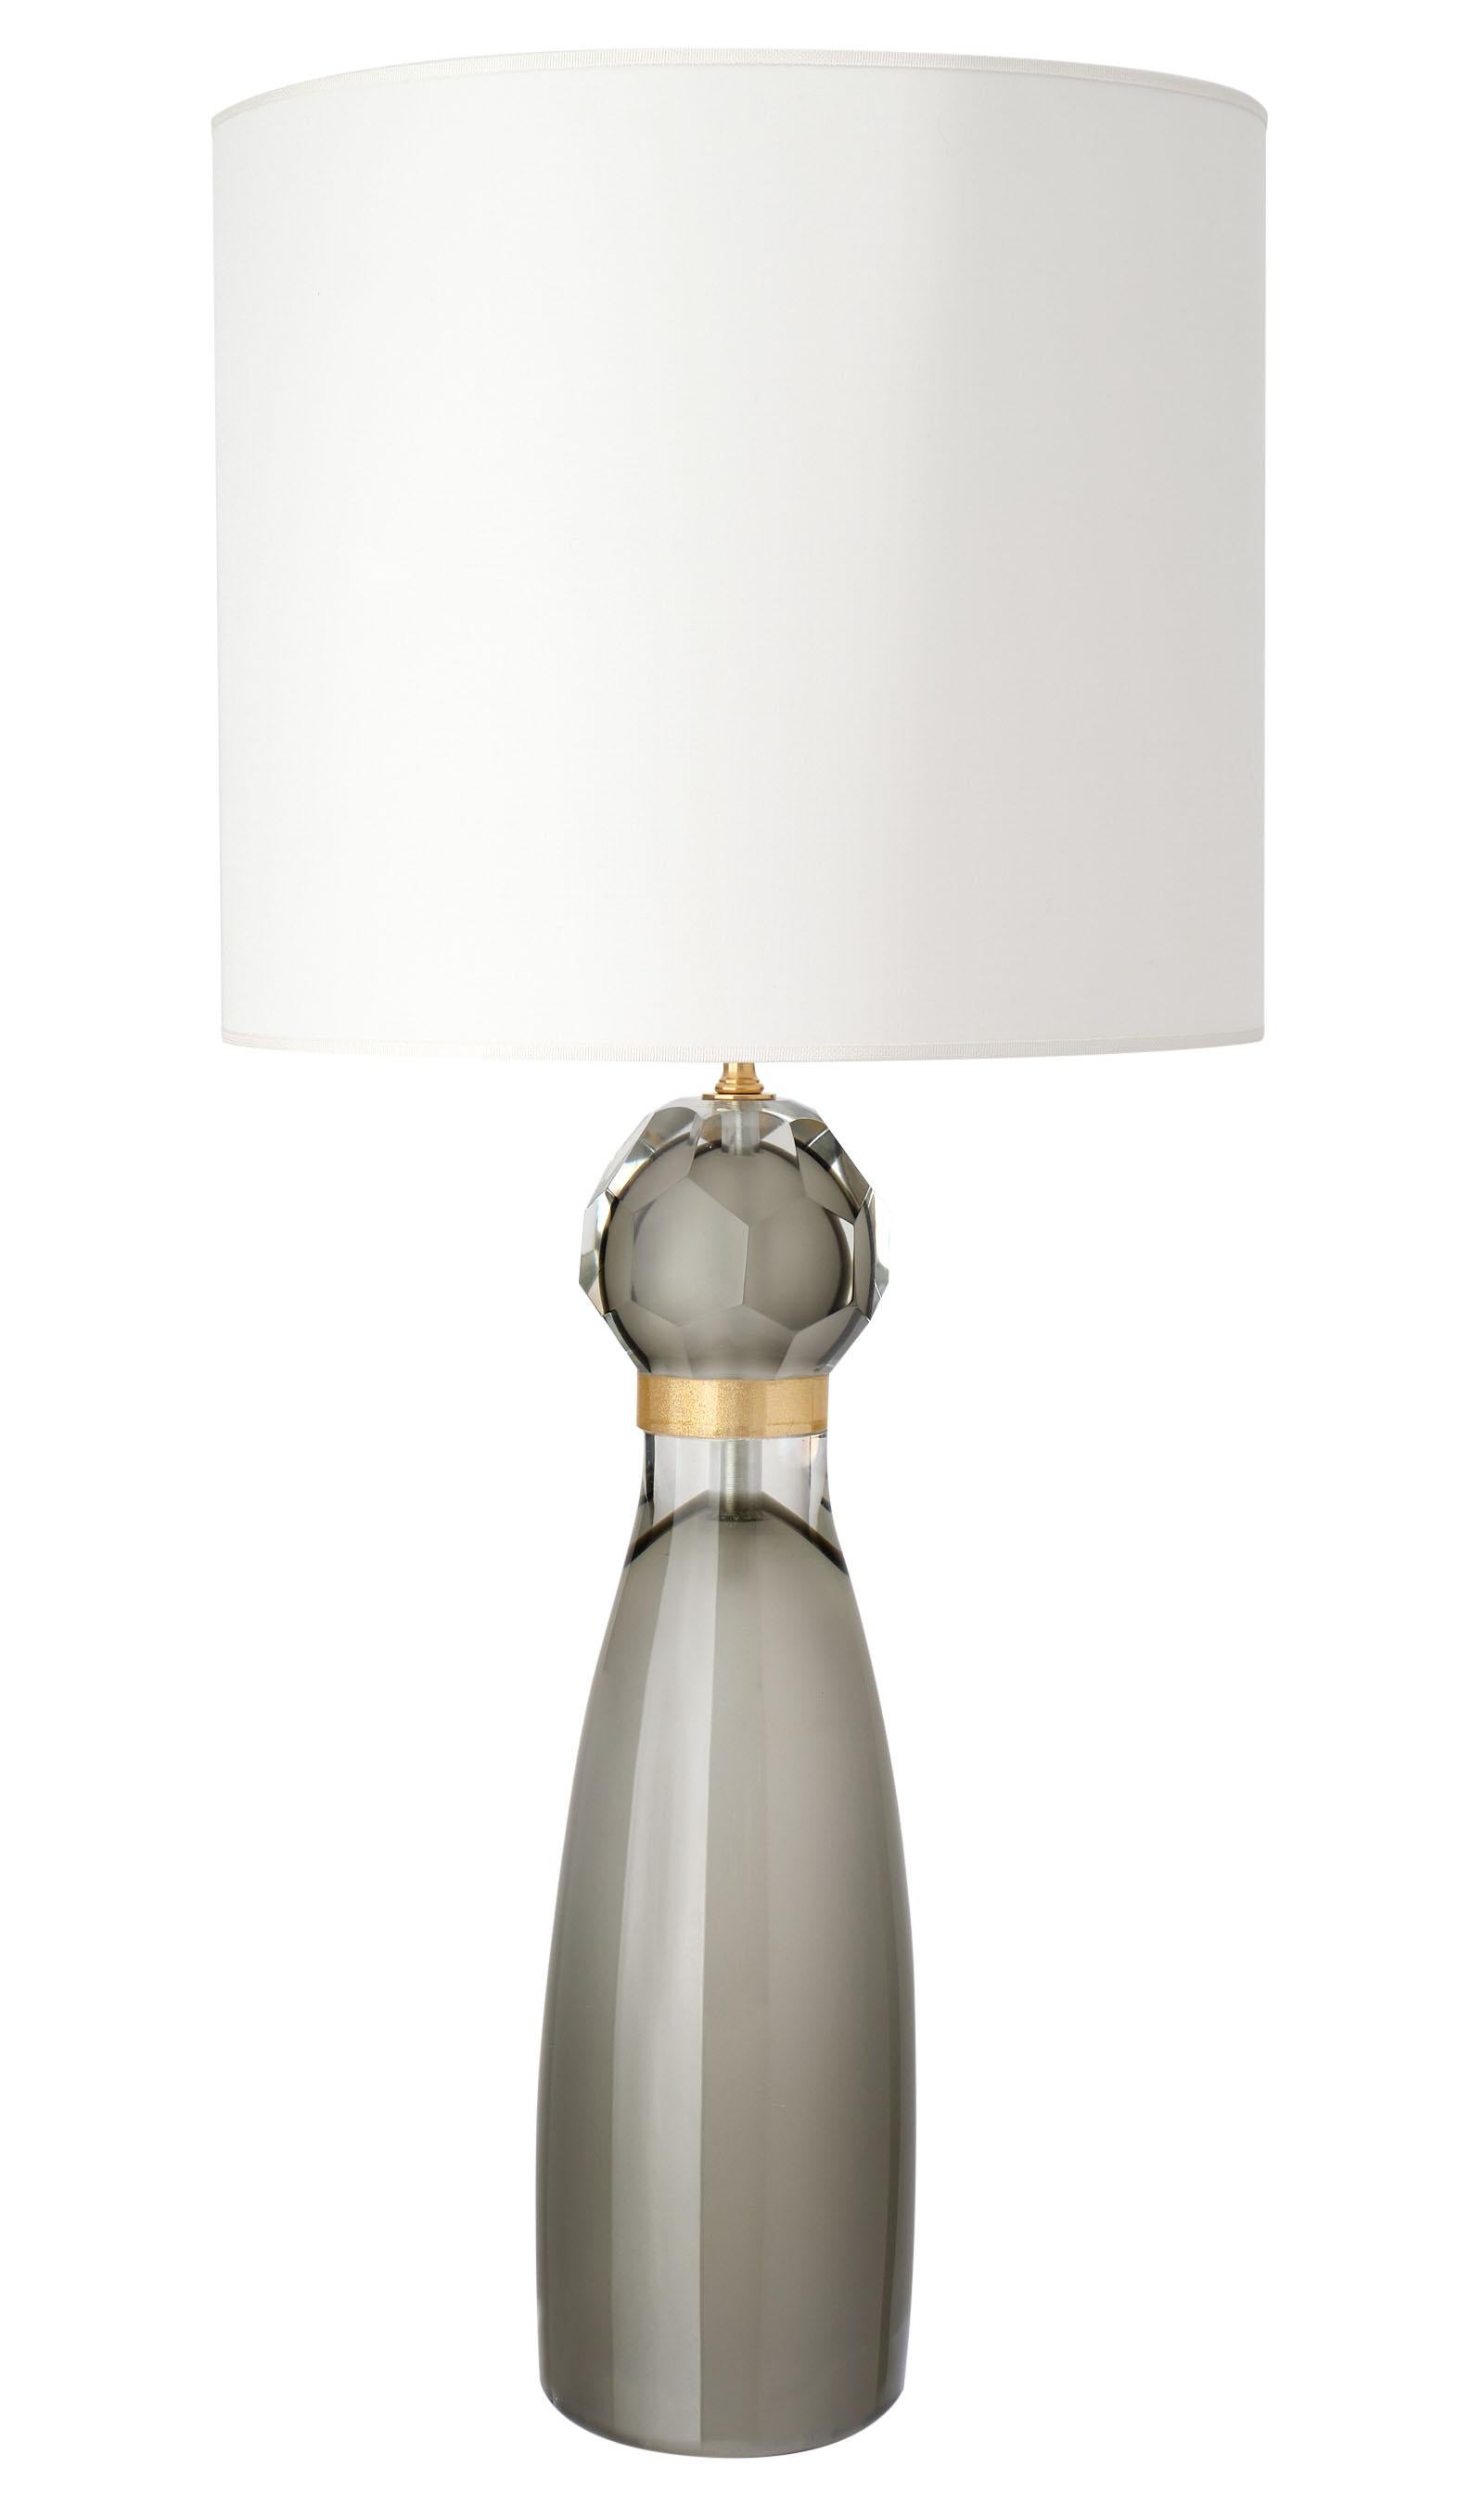 Italian hand blown Murano glass table lamps, in polished pearl gray glass fading to clear just below 23-karat gold flecked rings. At once formal and nonchalant, these sleek lights are sure to take your space to the next level. We were seduced by the